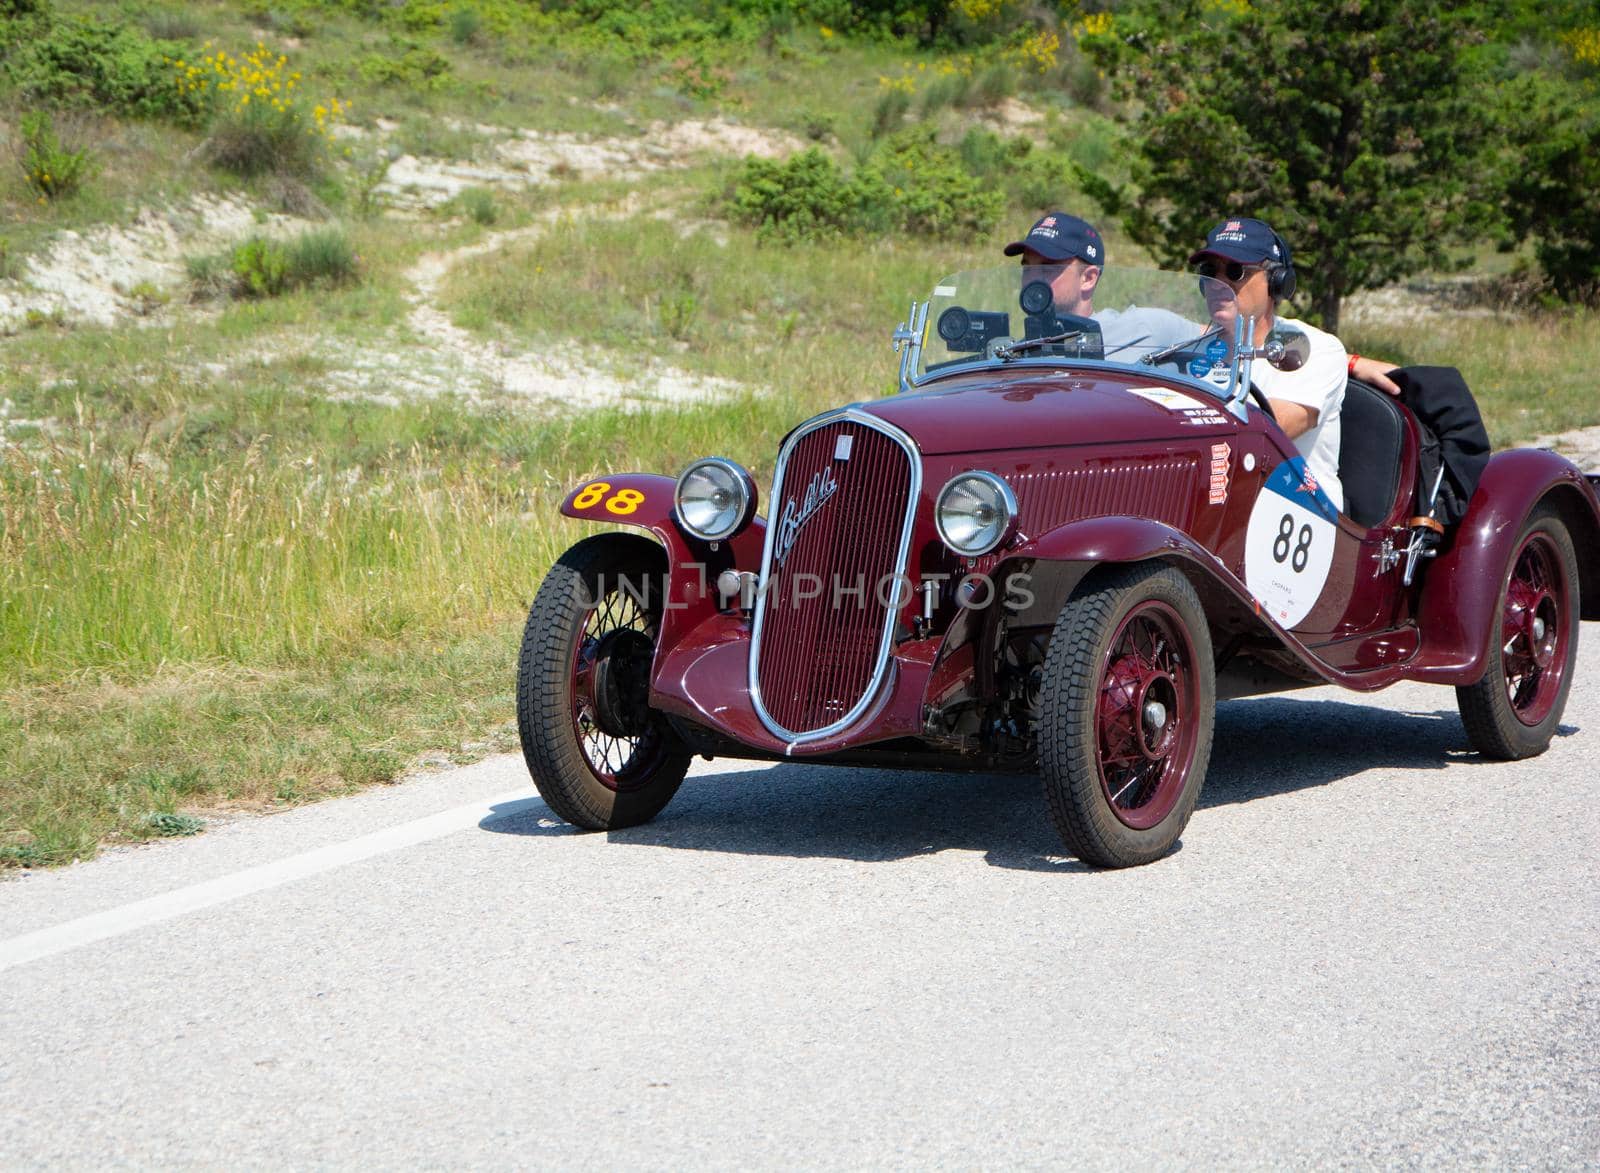 FIAT 508 S BALILLA COPPA D ORO 1934 on an old racing car in rally Mille Miglia 2022 the famous italian historical race (1927-1957 by massimocampanari